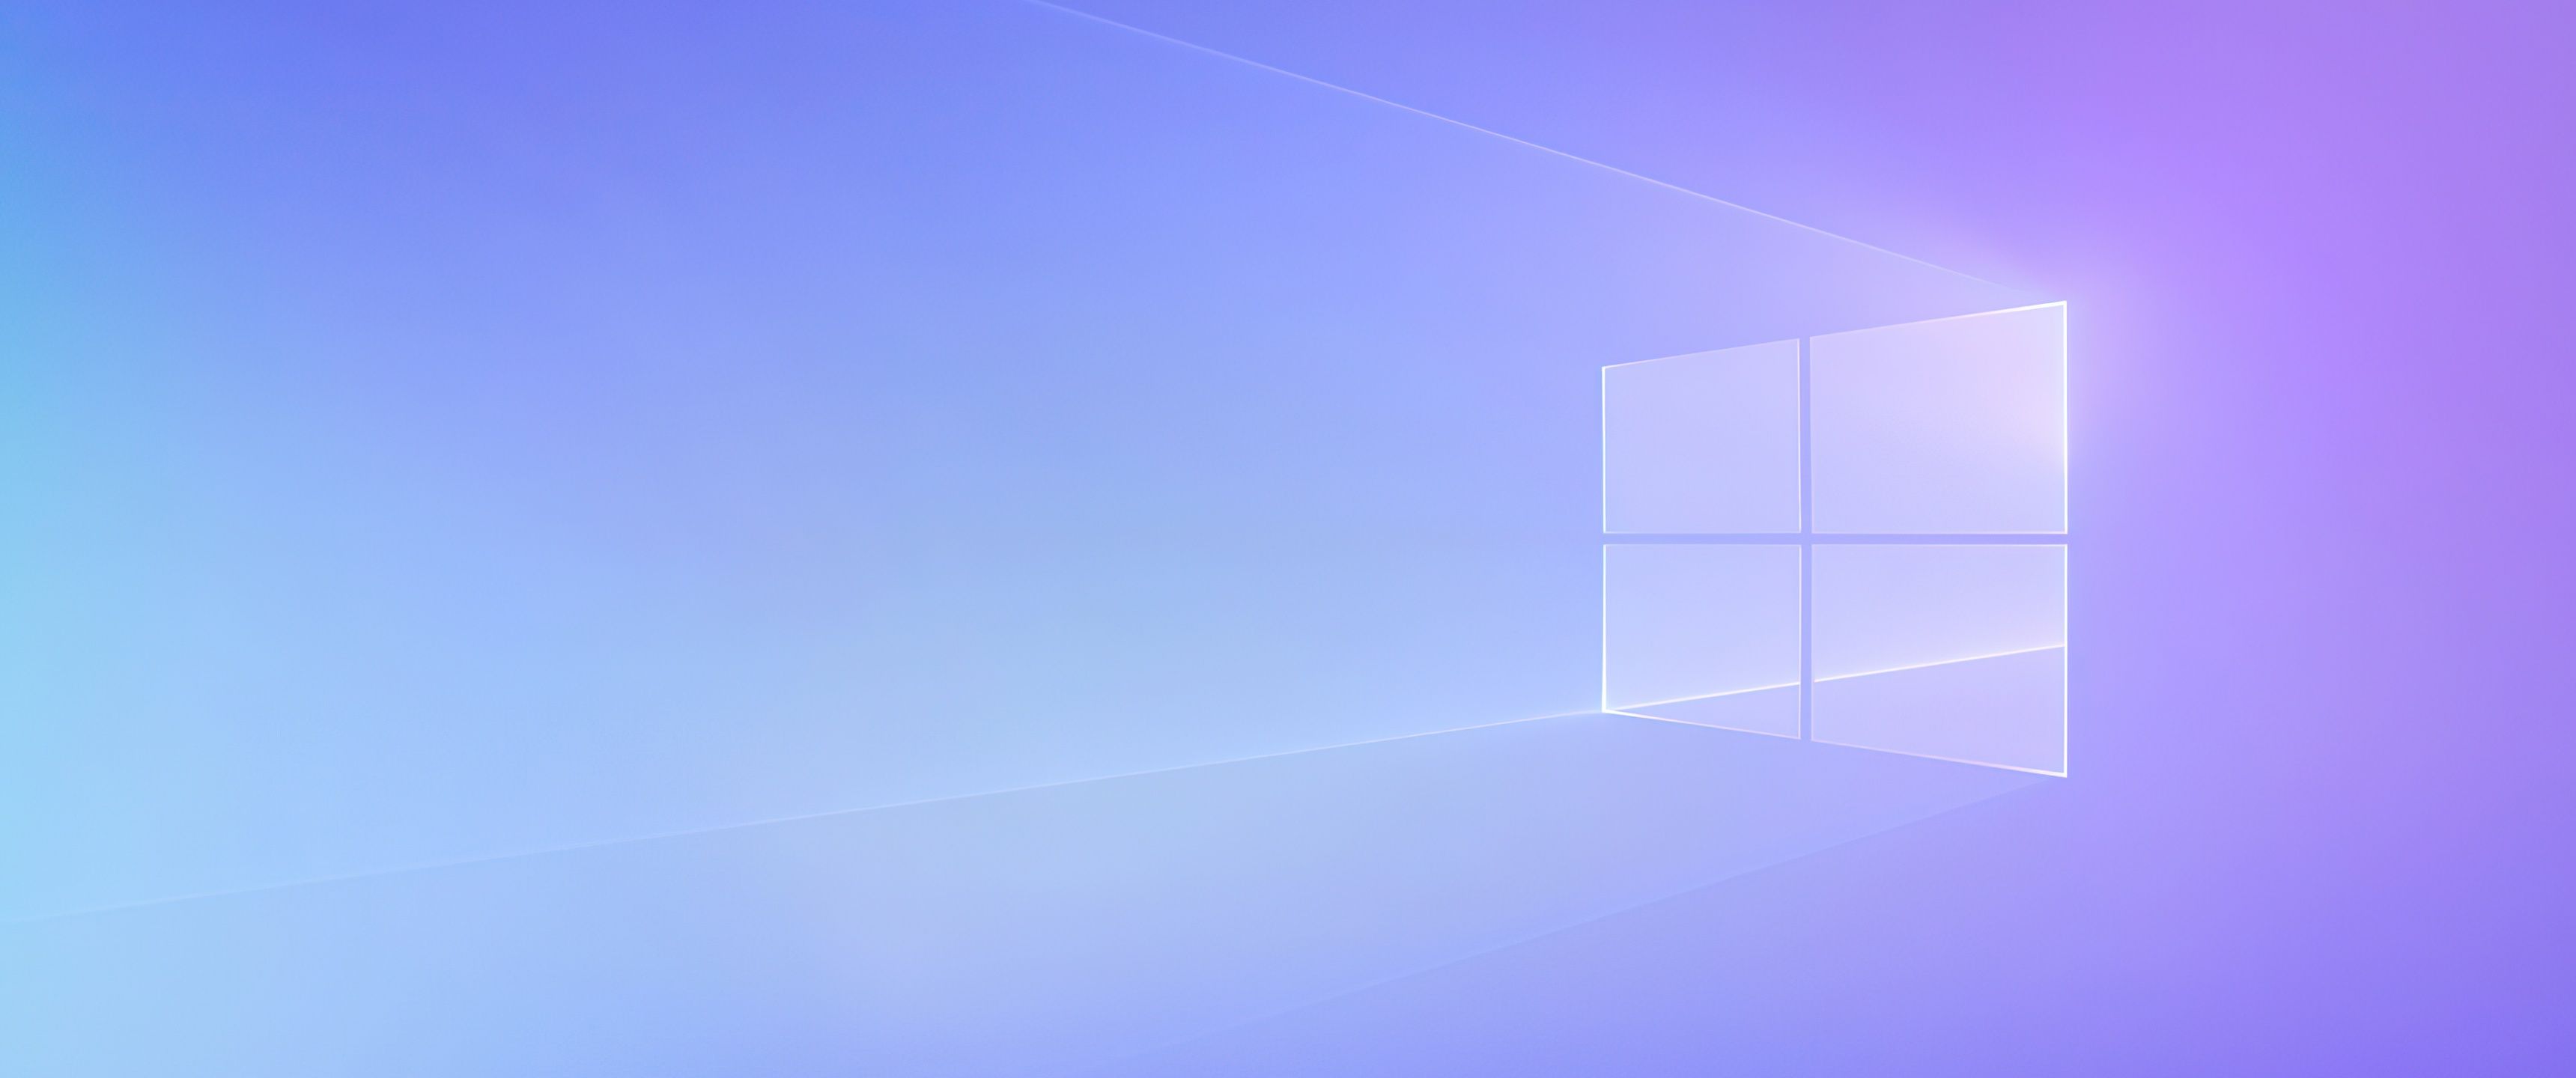 Windows 10 wallpaper, with a purple and blue background - Windows 10